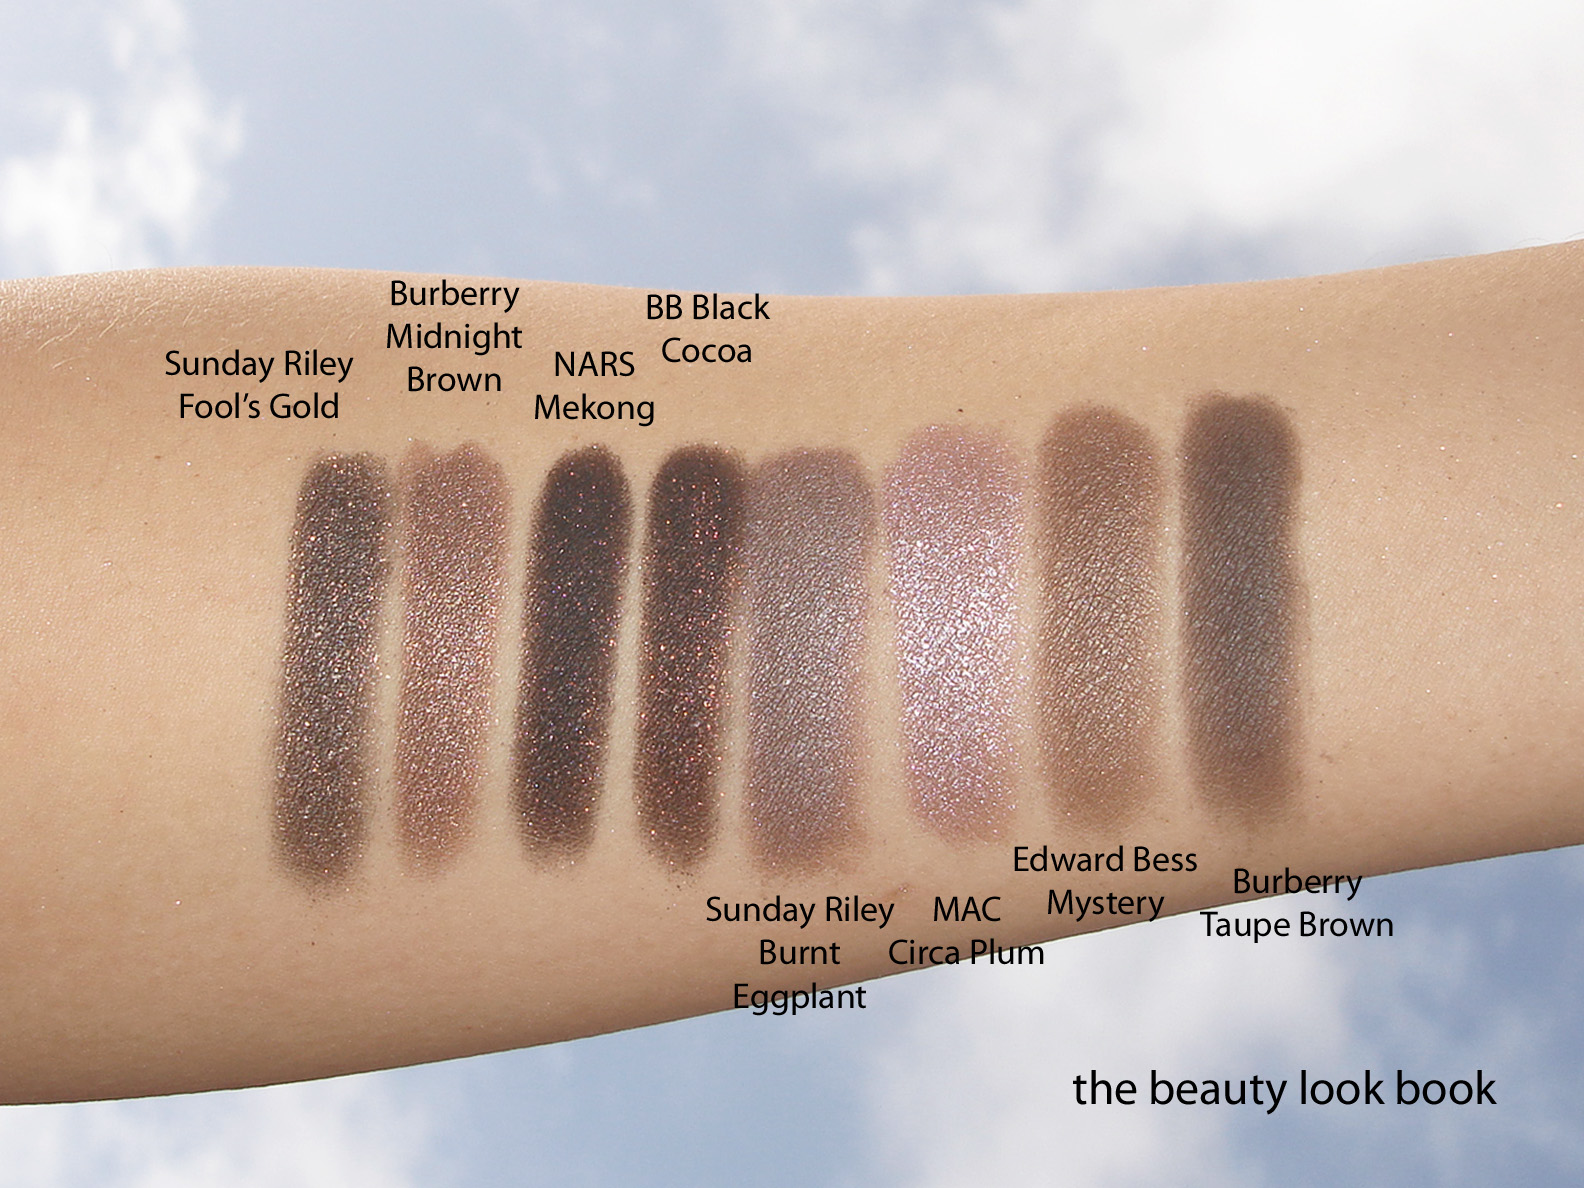 Sunday Riley Eye Shadow Comparisons The Beauty Look Book